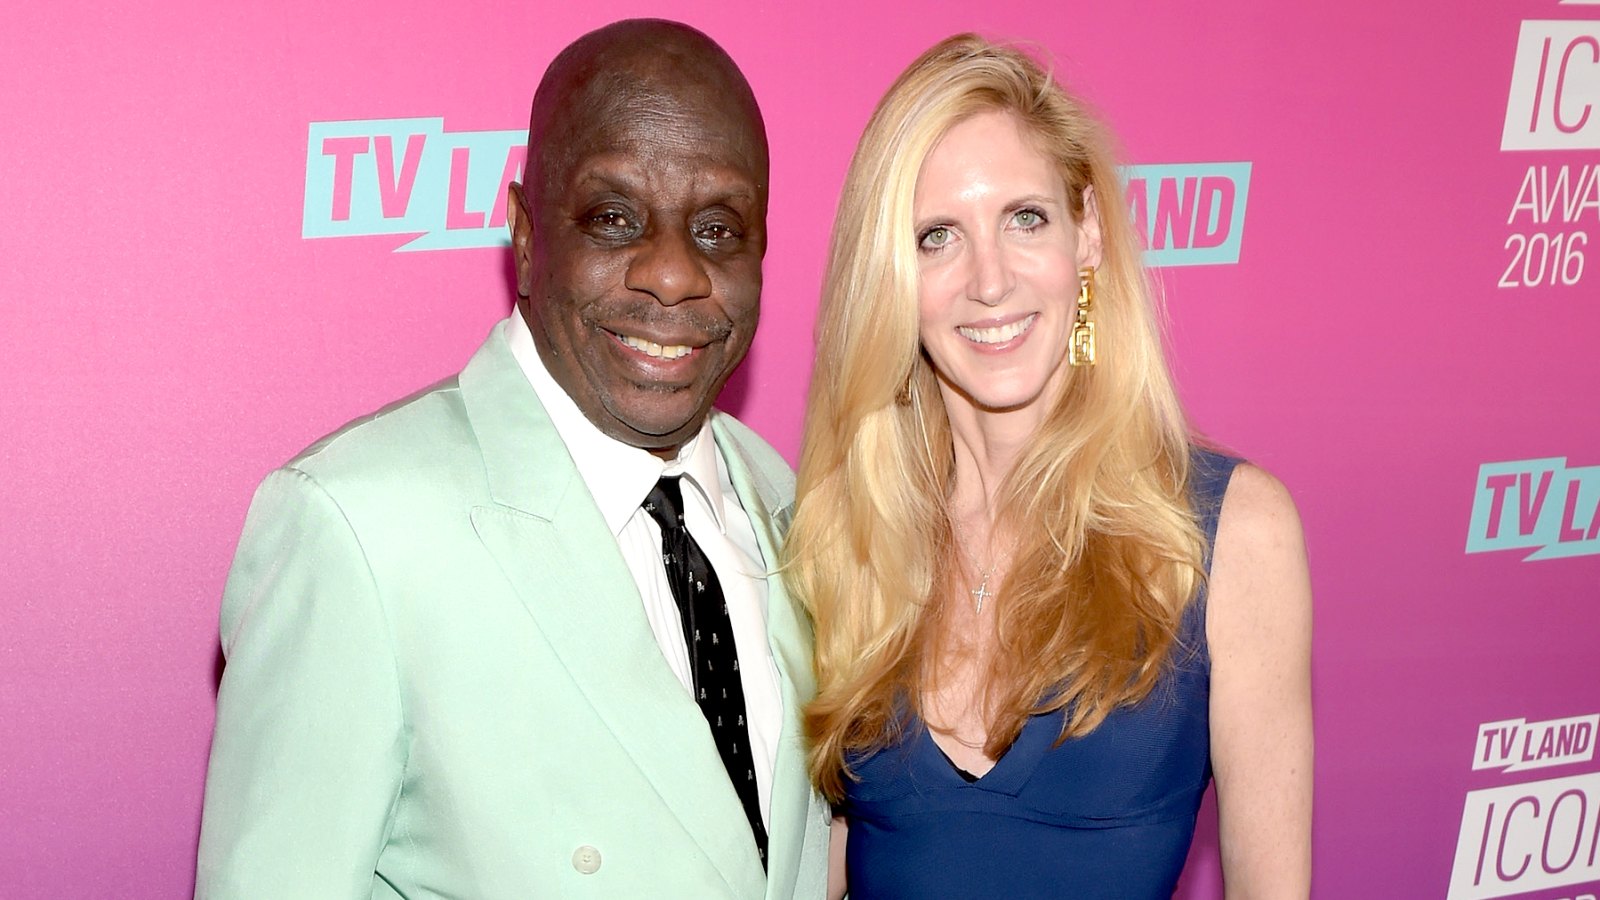 Jimmie Walker and political commentator Ann Coulter attend 2016 TV Land Icon Awards at The Barker Hanger on April 10, 2016 in Santa Monica, California.